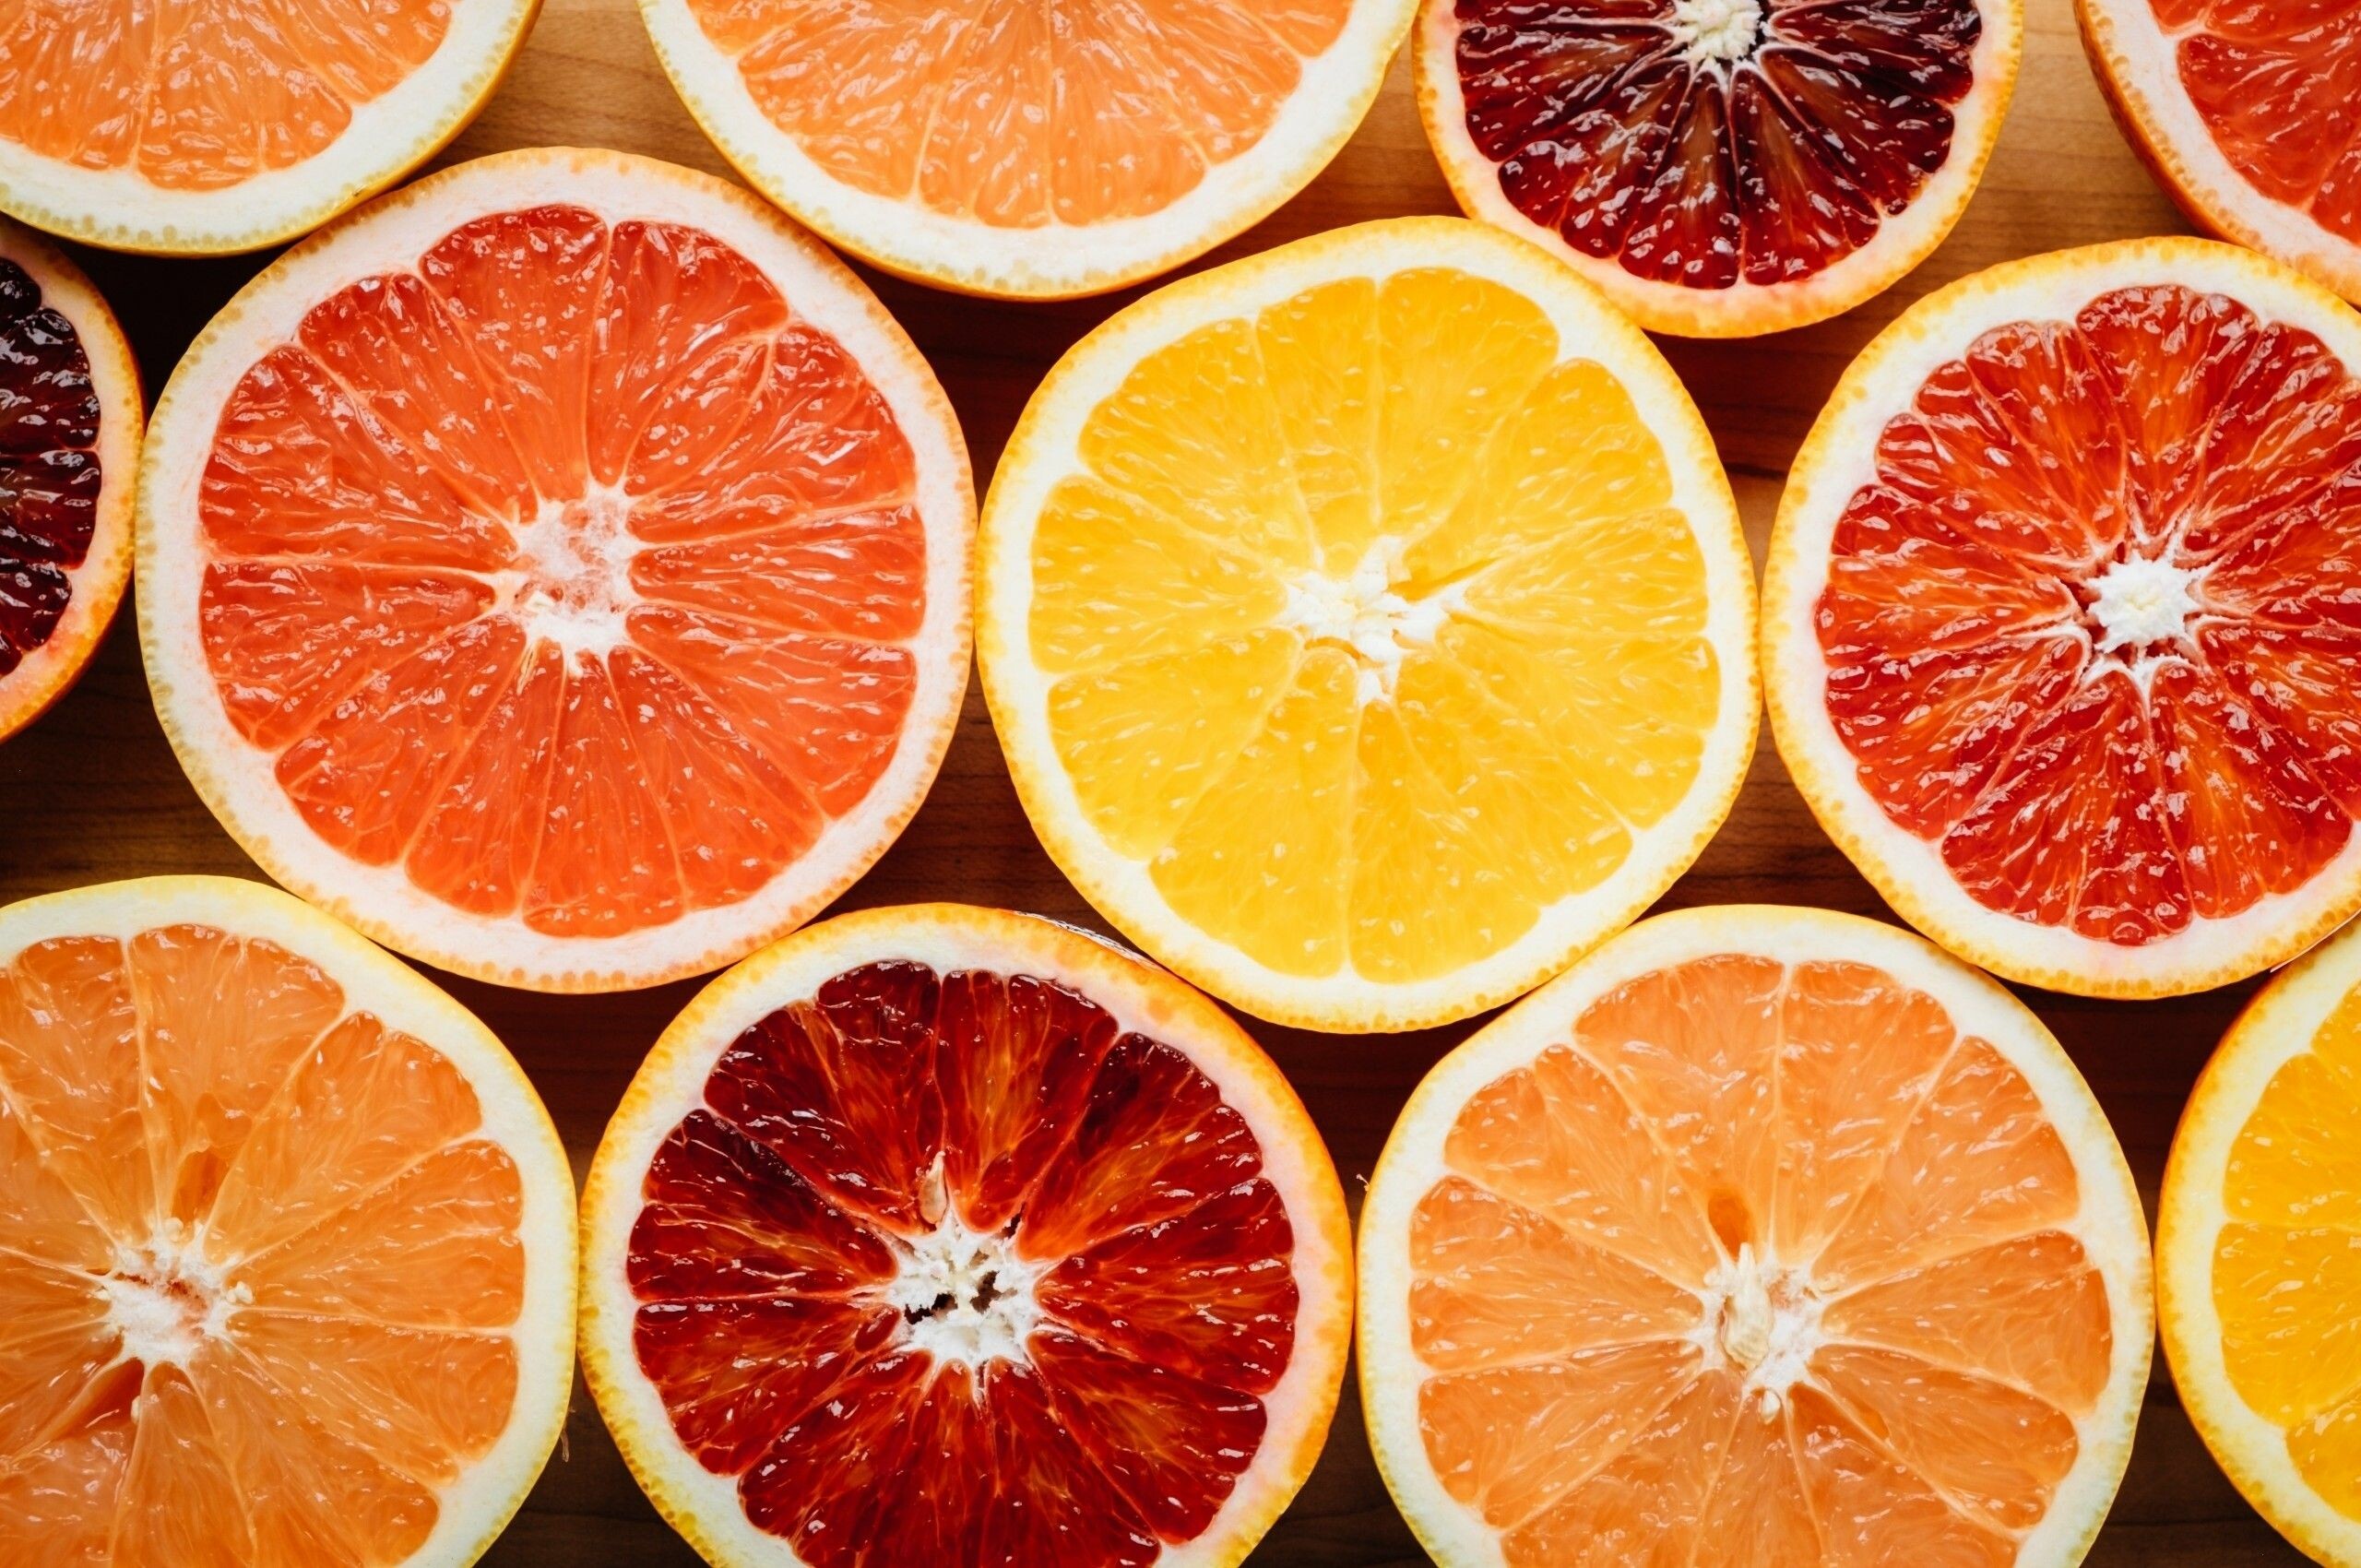 Fruit: Citrus, A genus of flowering trees and shrubs in the rue family, Rutaceae. 2560x1700 HD Wallpaper.